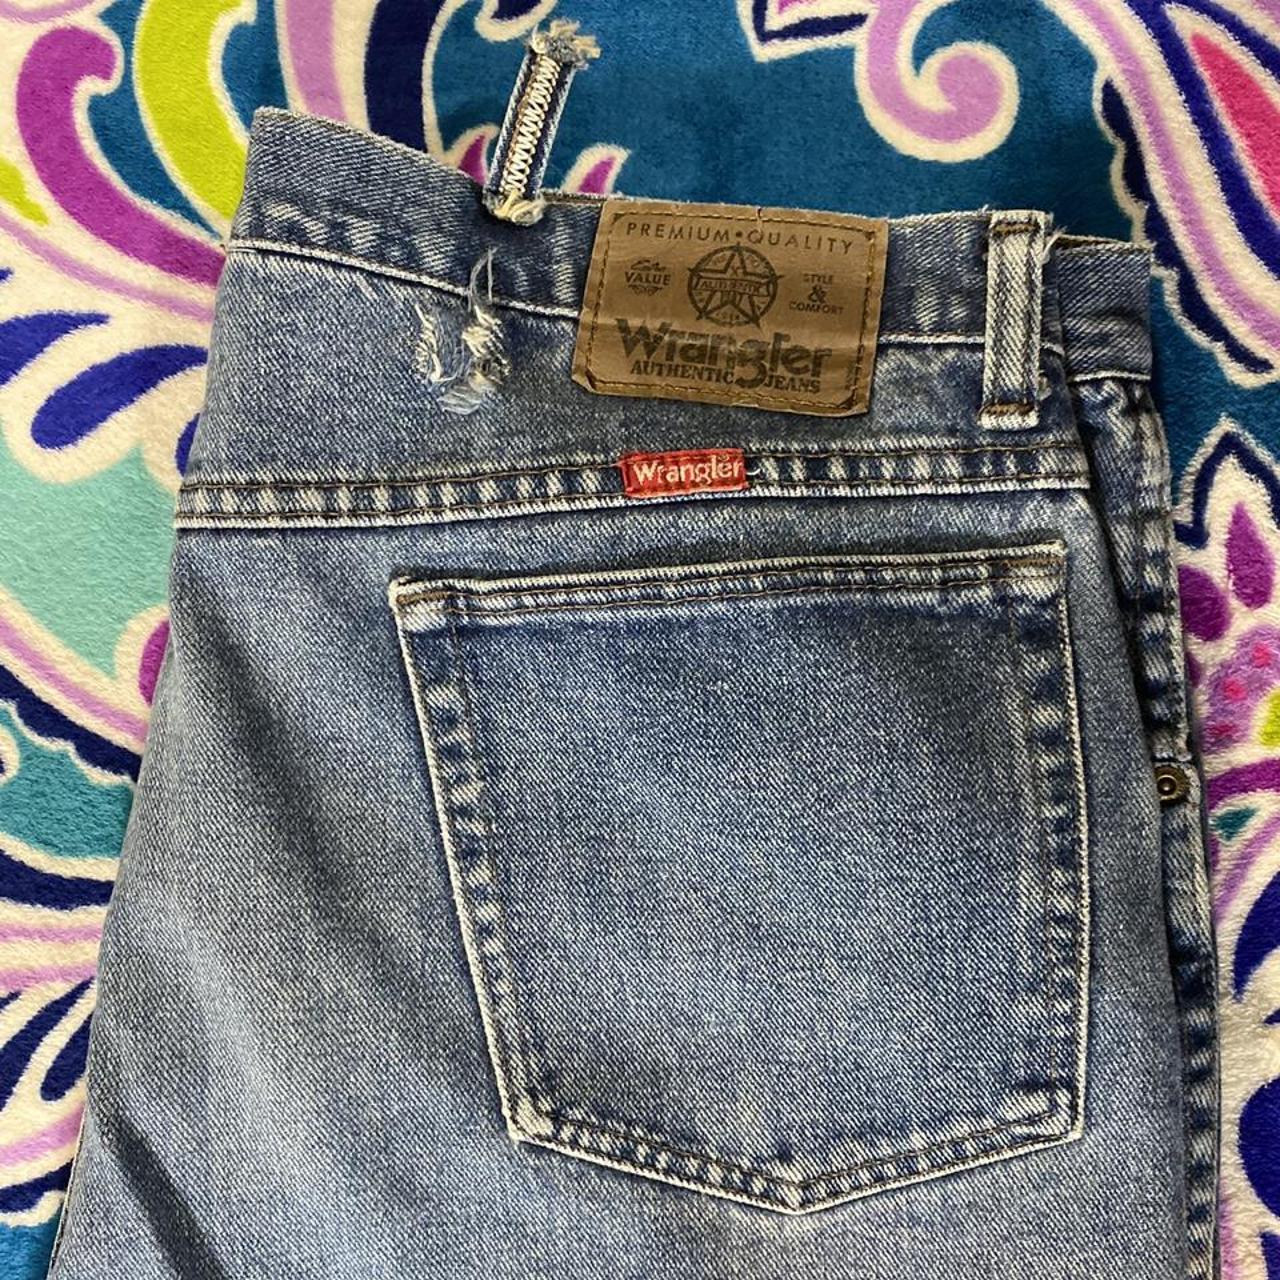 Product Image 2 - Vintage 90s Wrangler jeans! These